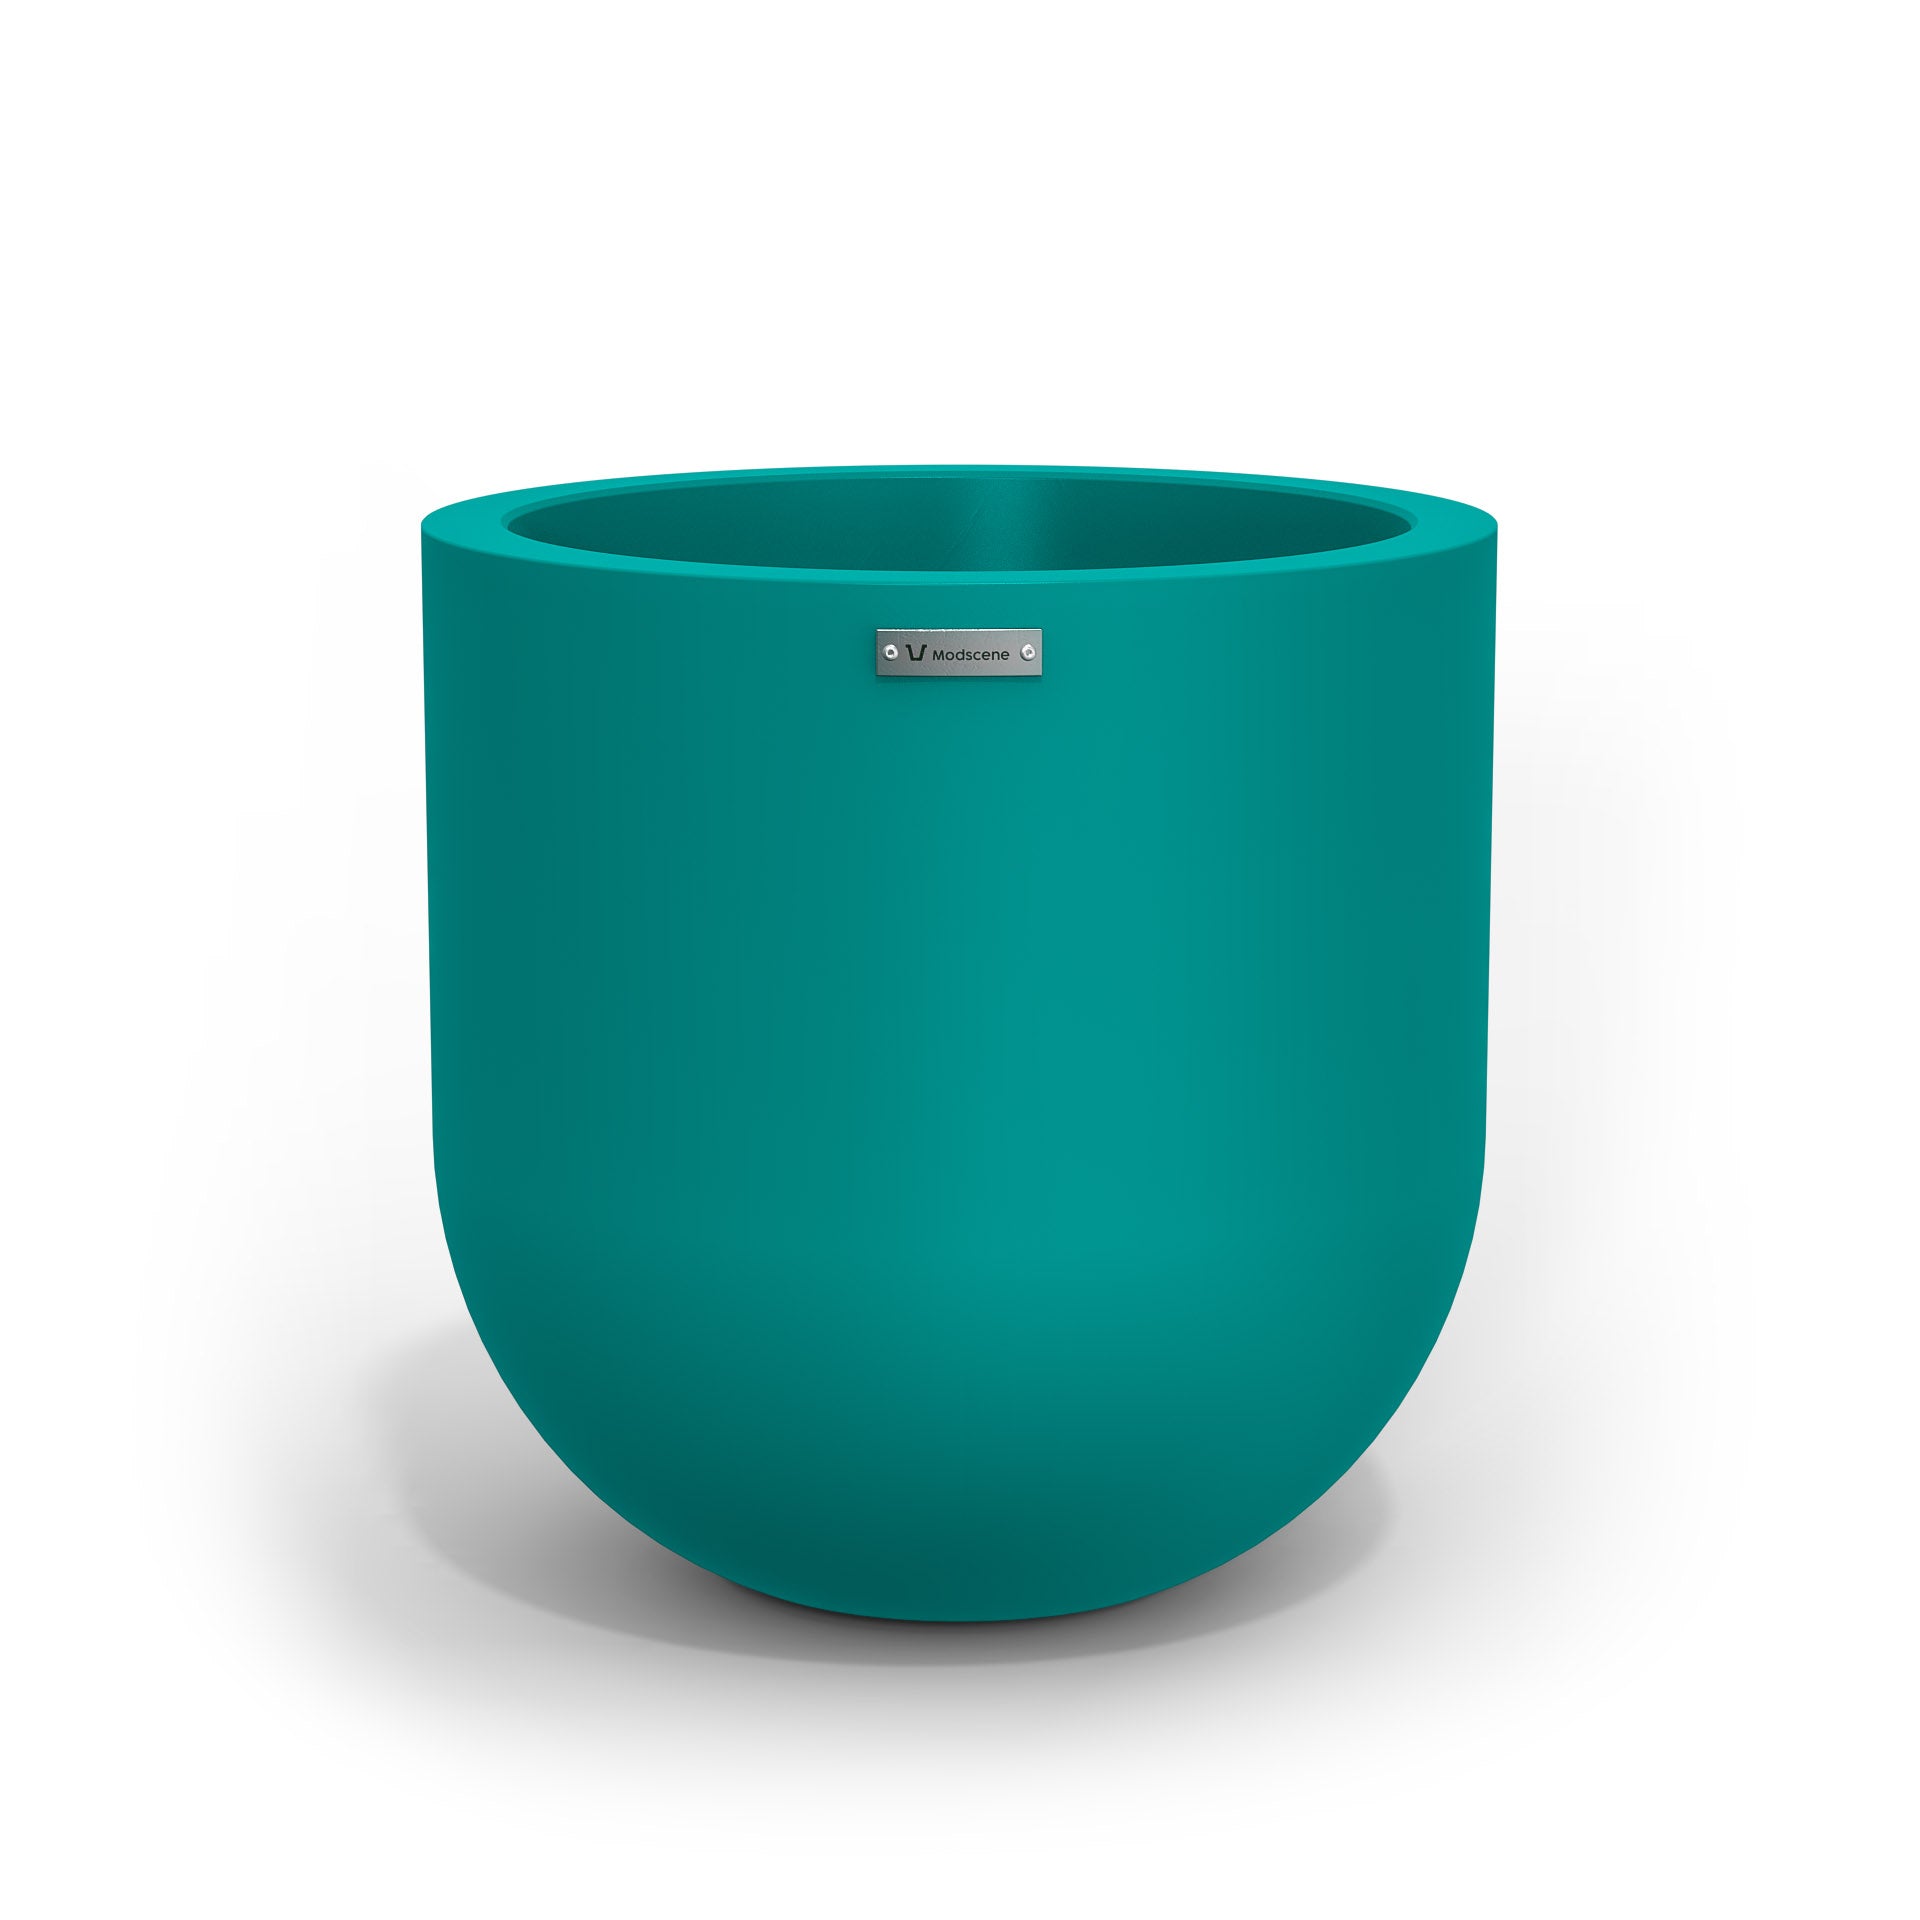 A medium sized teal planter pot made by Modscene.